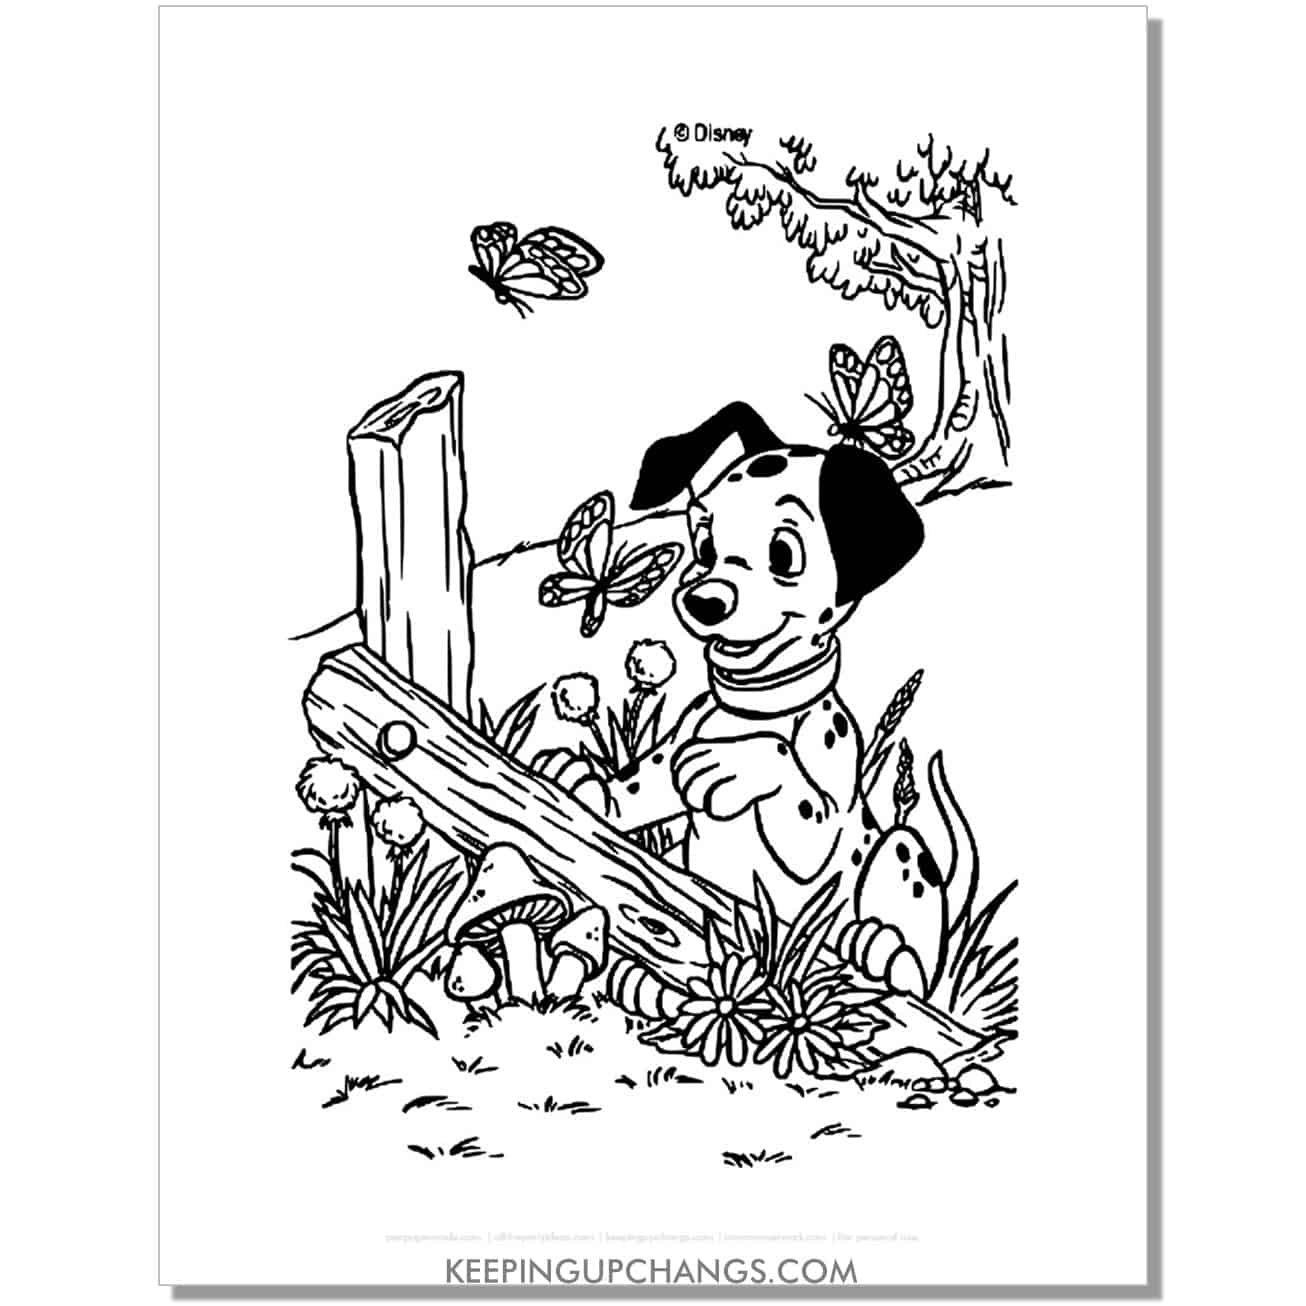 free lucky playing with butterfly in a field 101 dalmations coloring page, sheet.